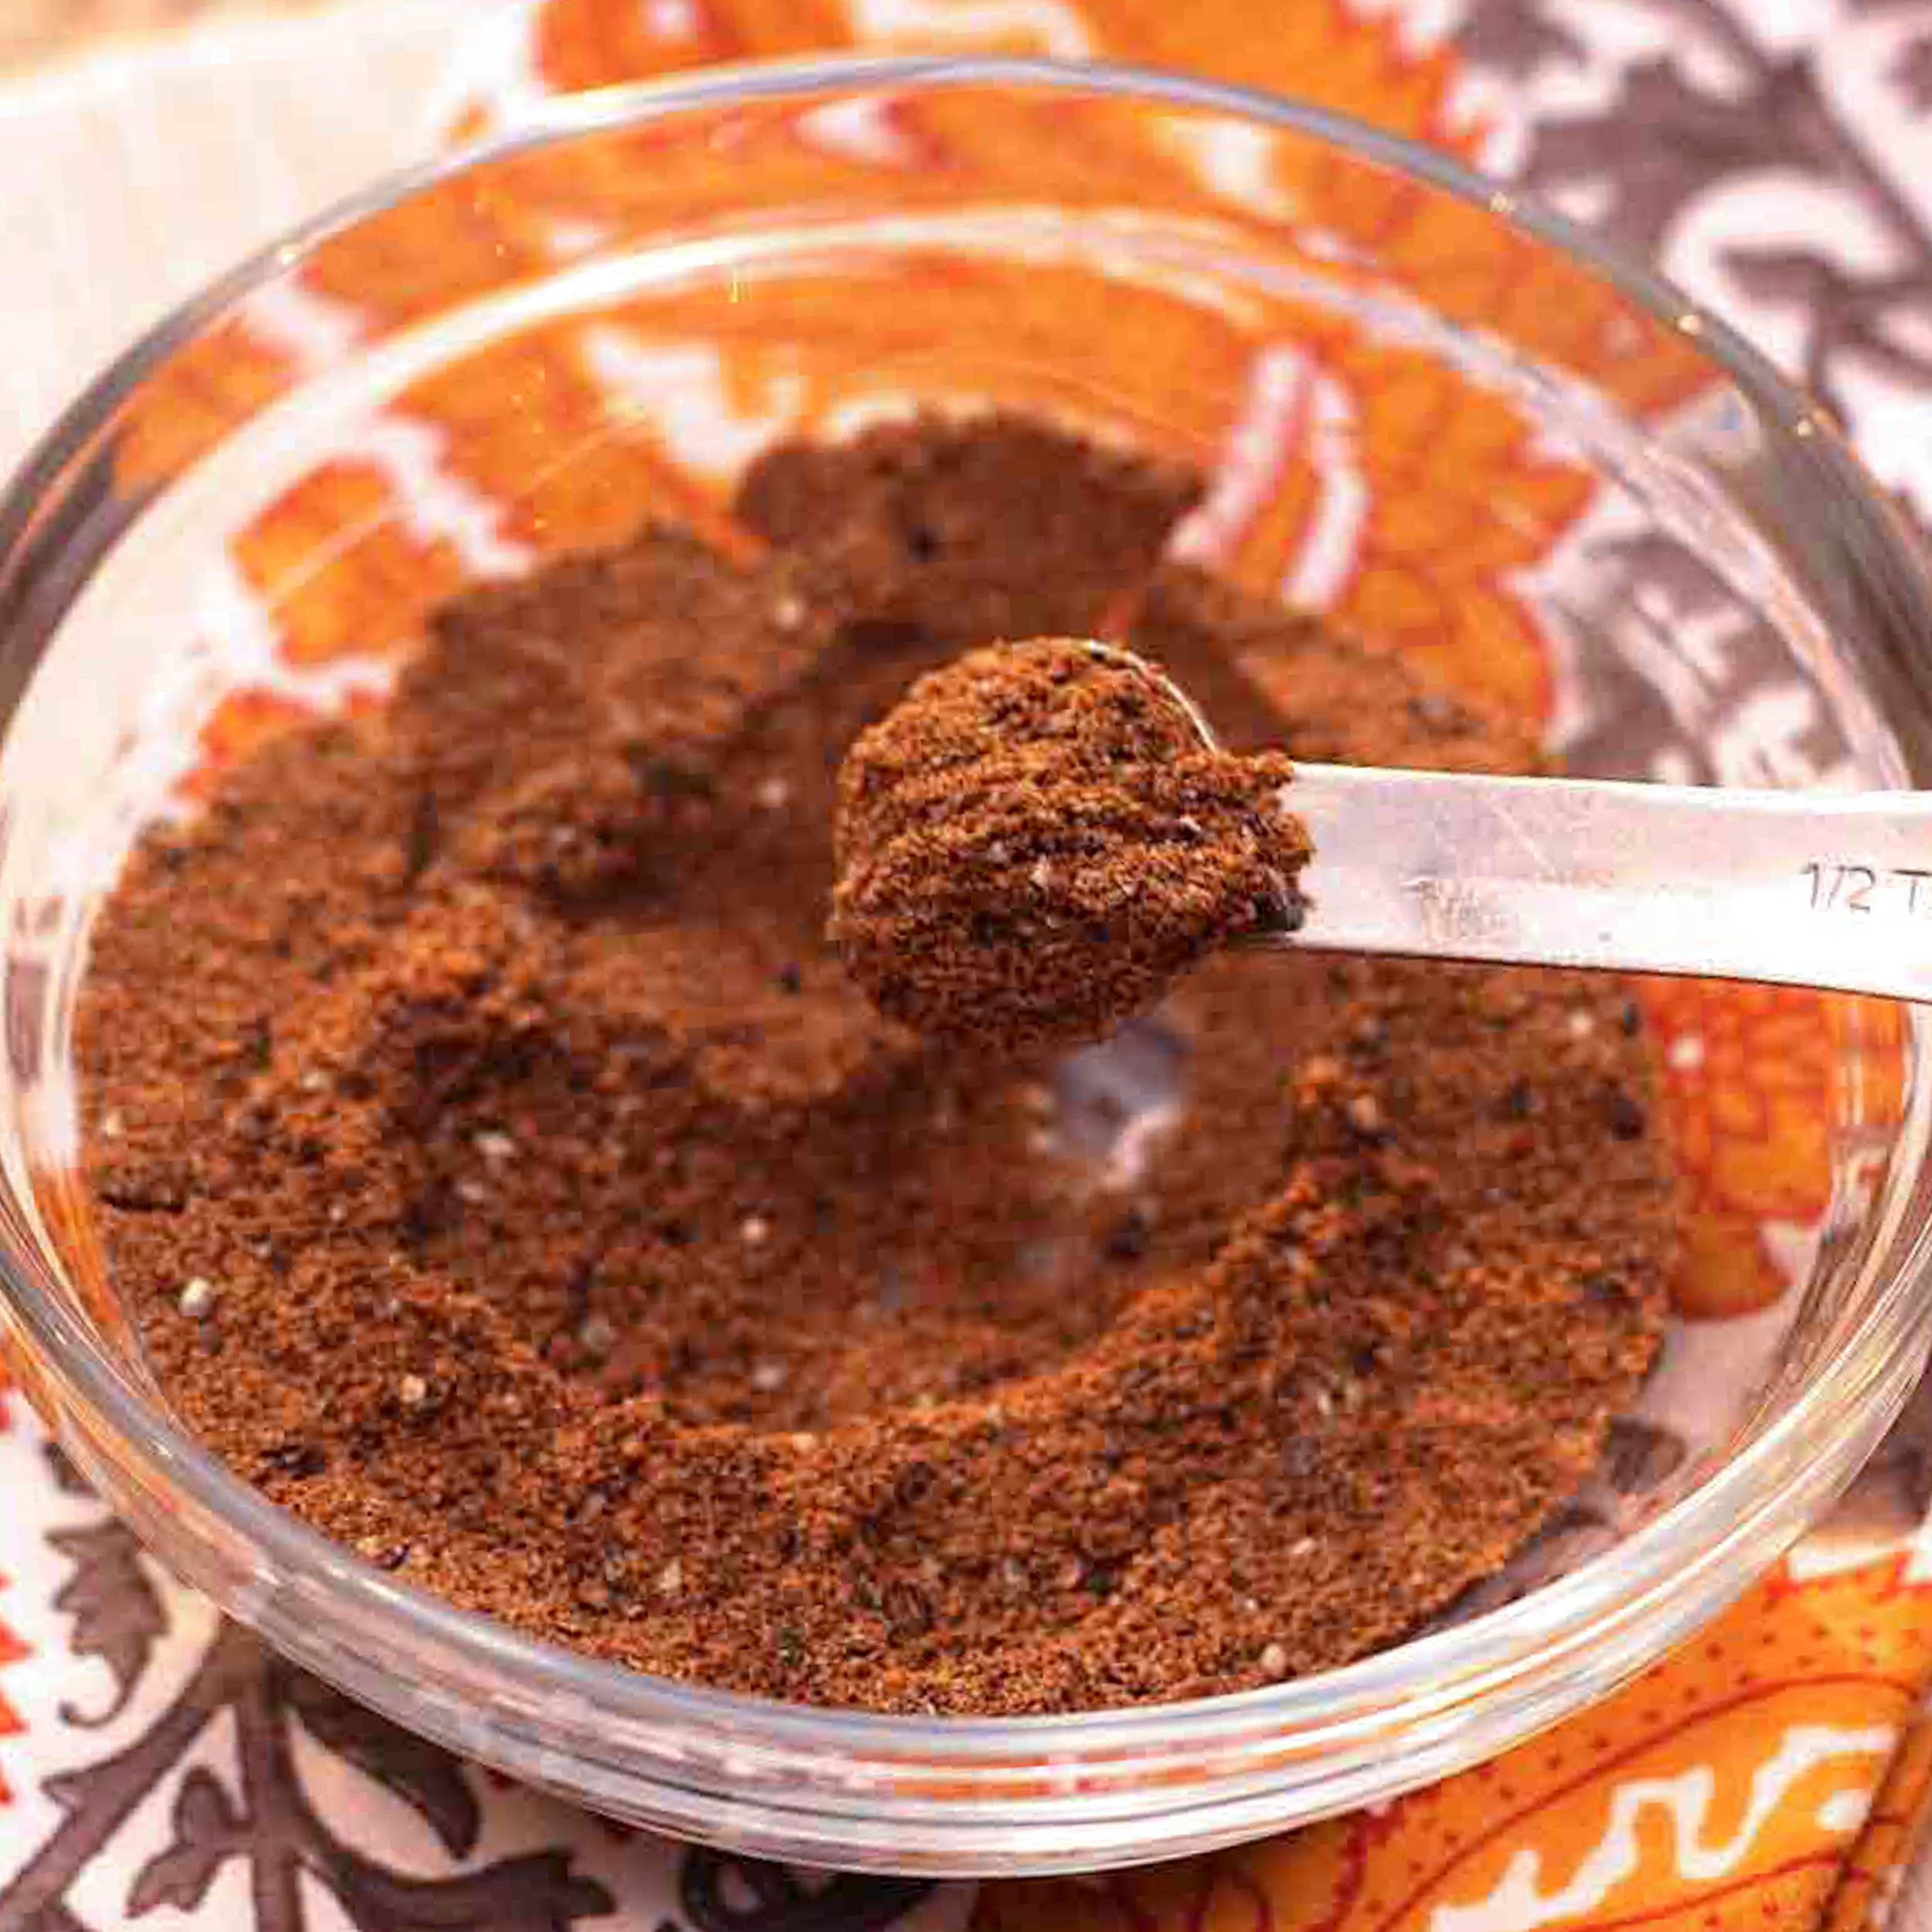 Make easy Garam Masala at home with this simple recipe in 15 min ! 